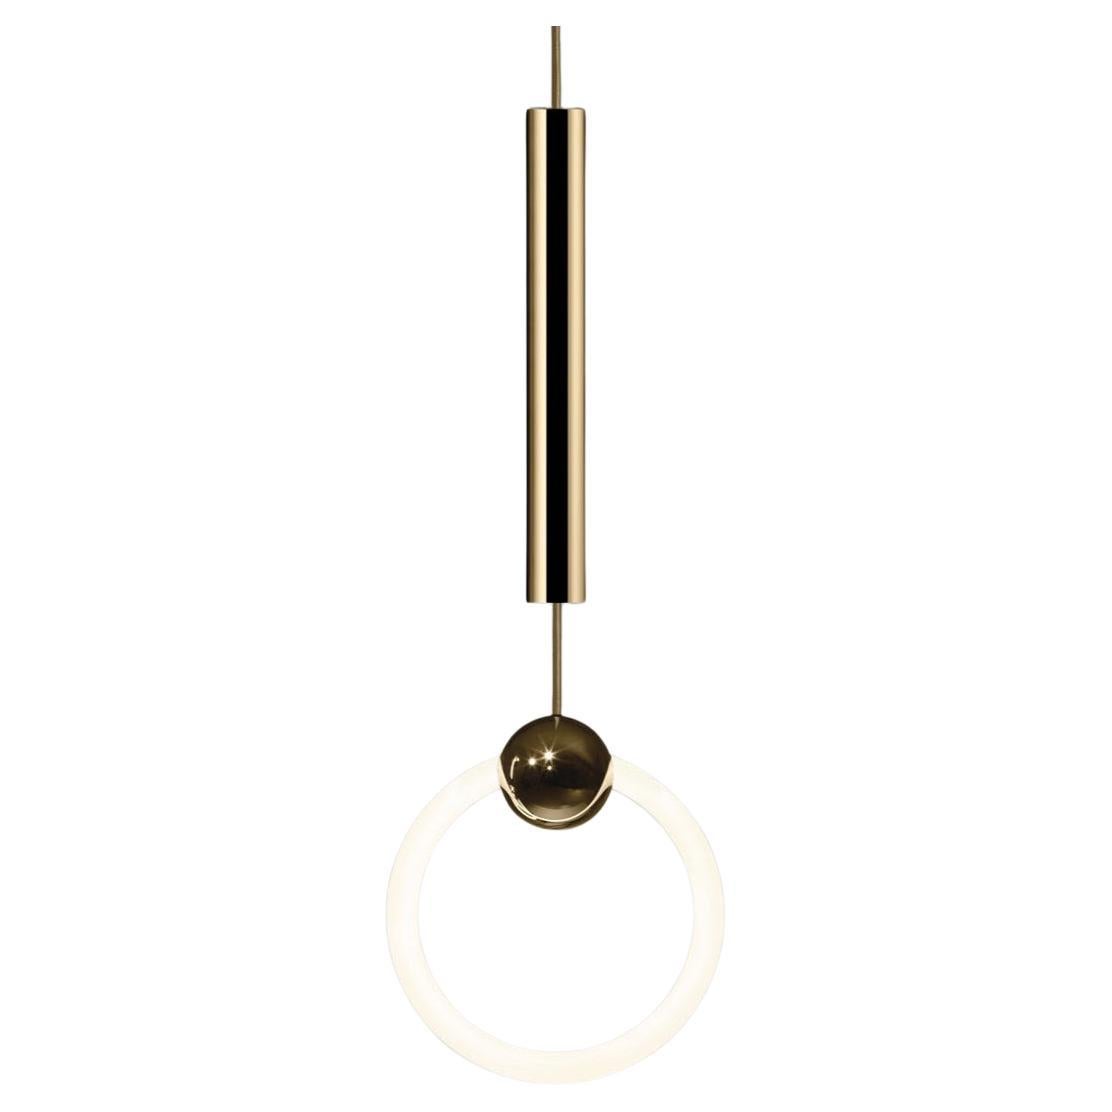 The iconic Ring Light by Lee Broom is relaunched as a brand new full-LED product for 2023. Featuring a polished gold sphere pierced by a dimmable LED tube to form the striking ring of light. A pendant of simplicity and elegance.

TECHNICAL